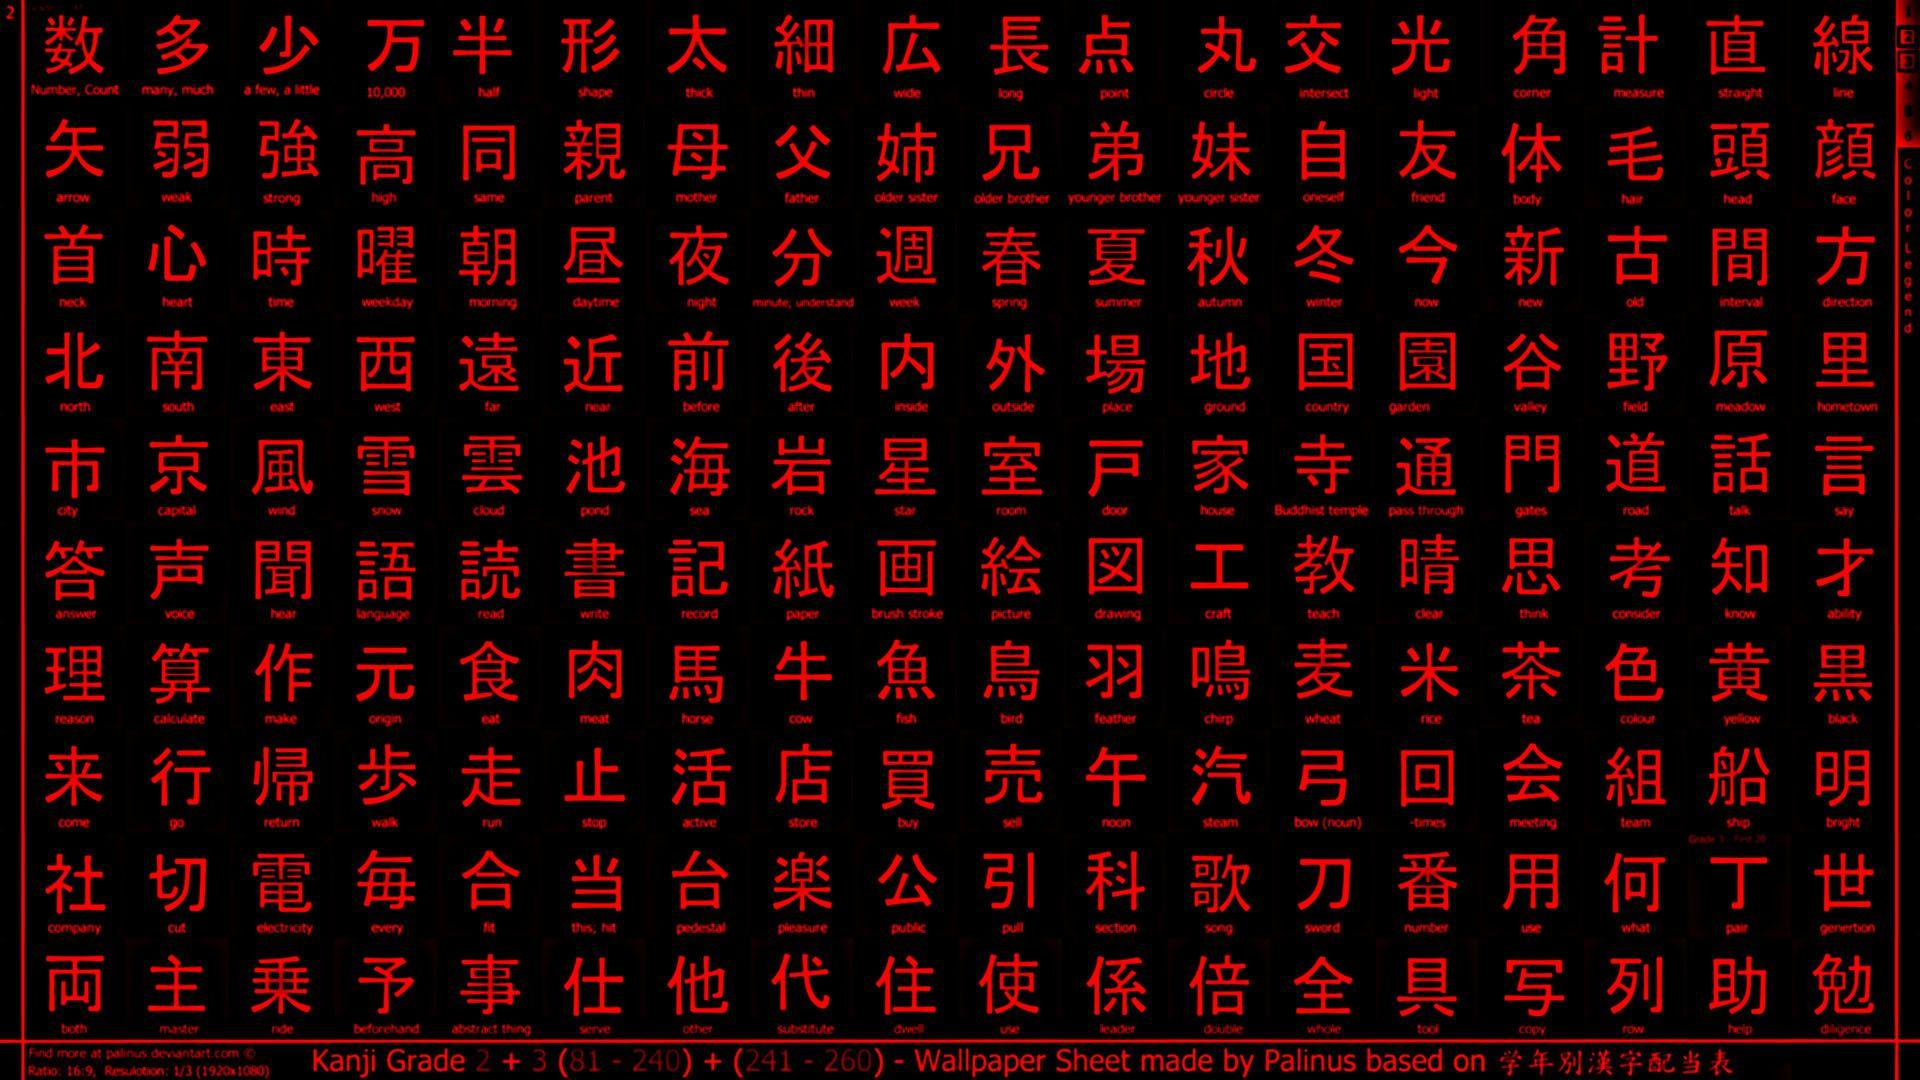 My new wallpaper is helping me a lot learning kanji. What do you